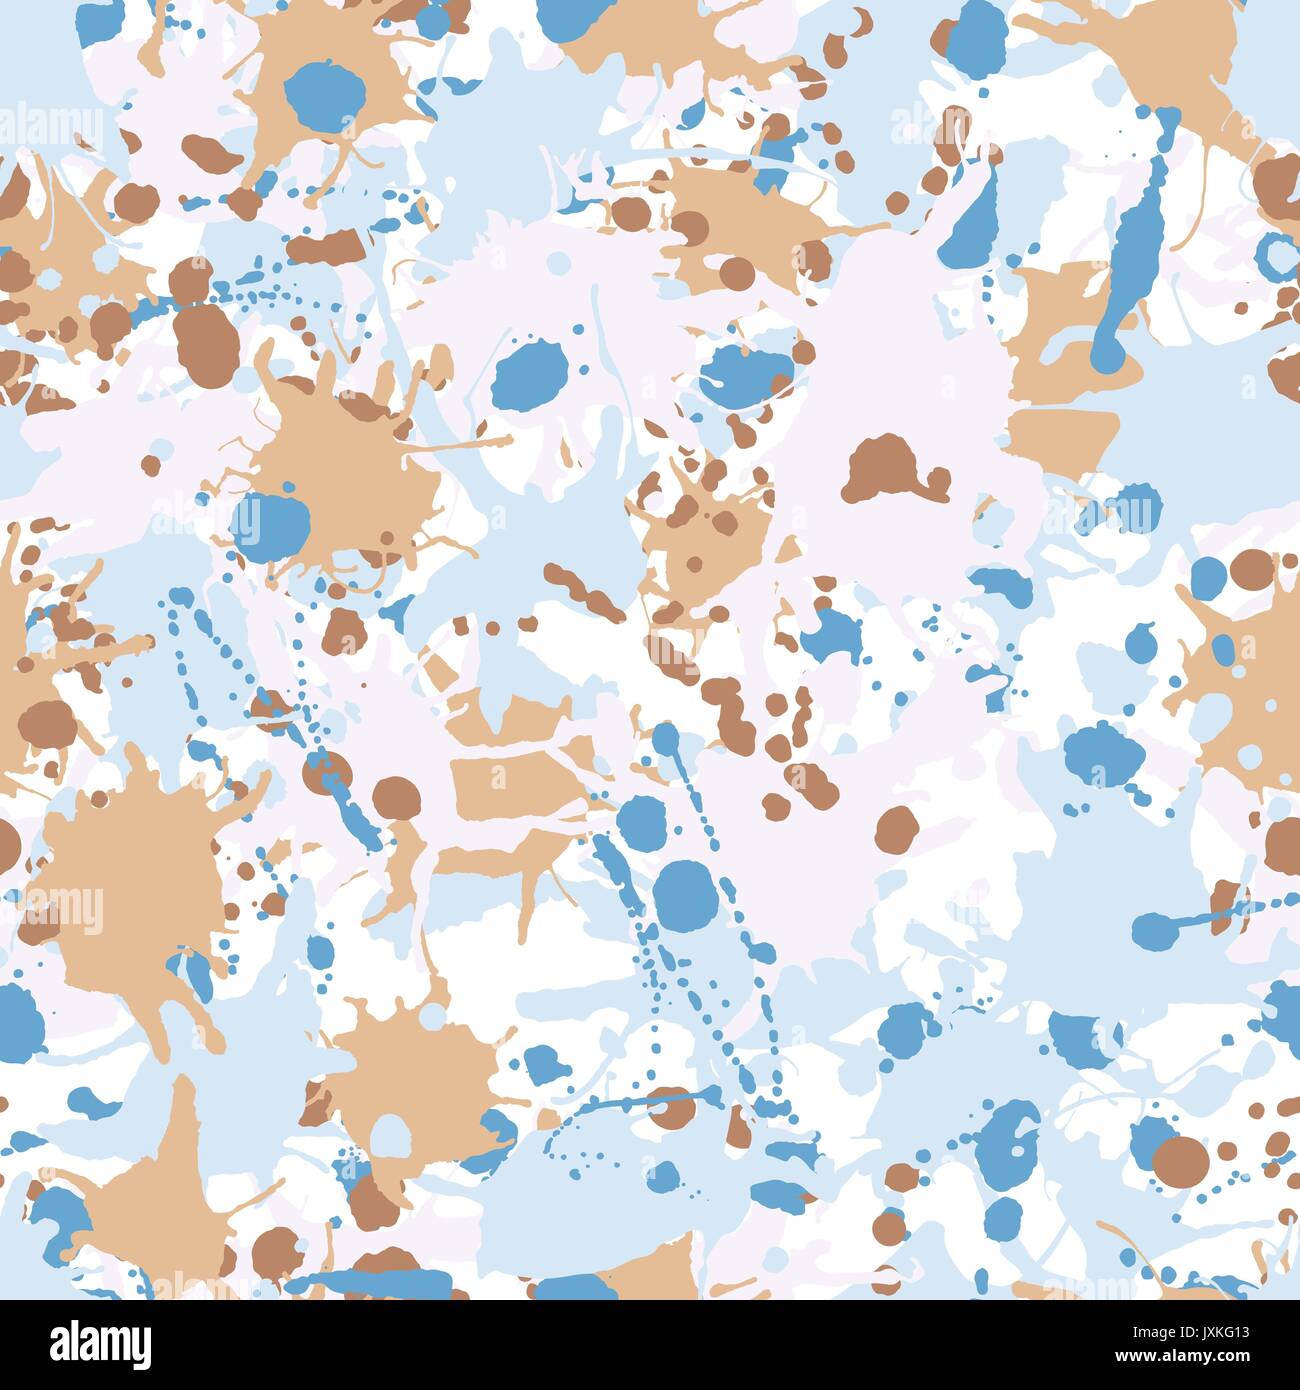 Blue beige brown white artistic ink paint splashes seamless pattern vector Stock Vector